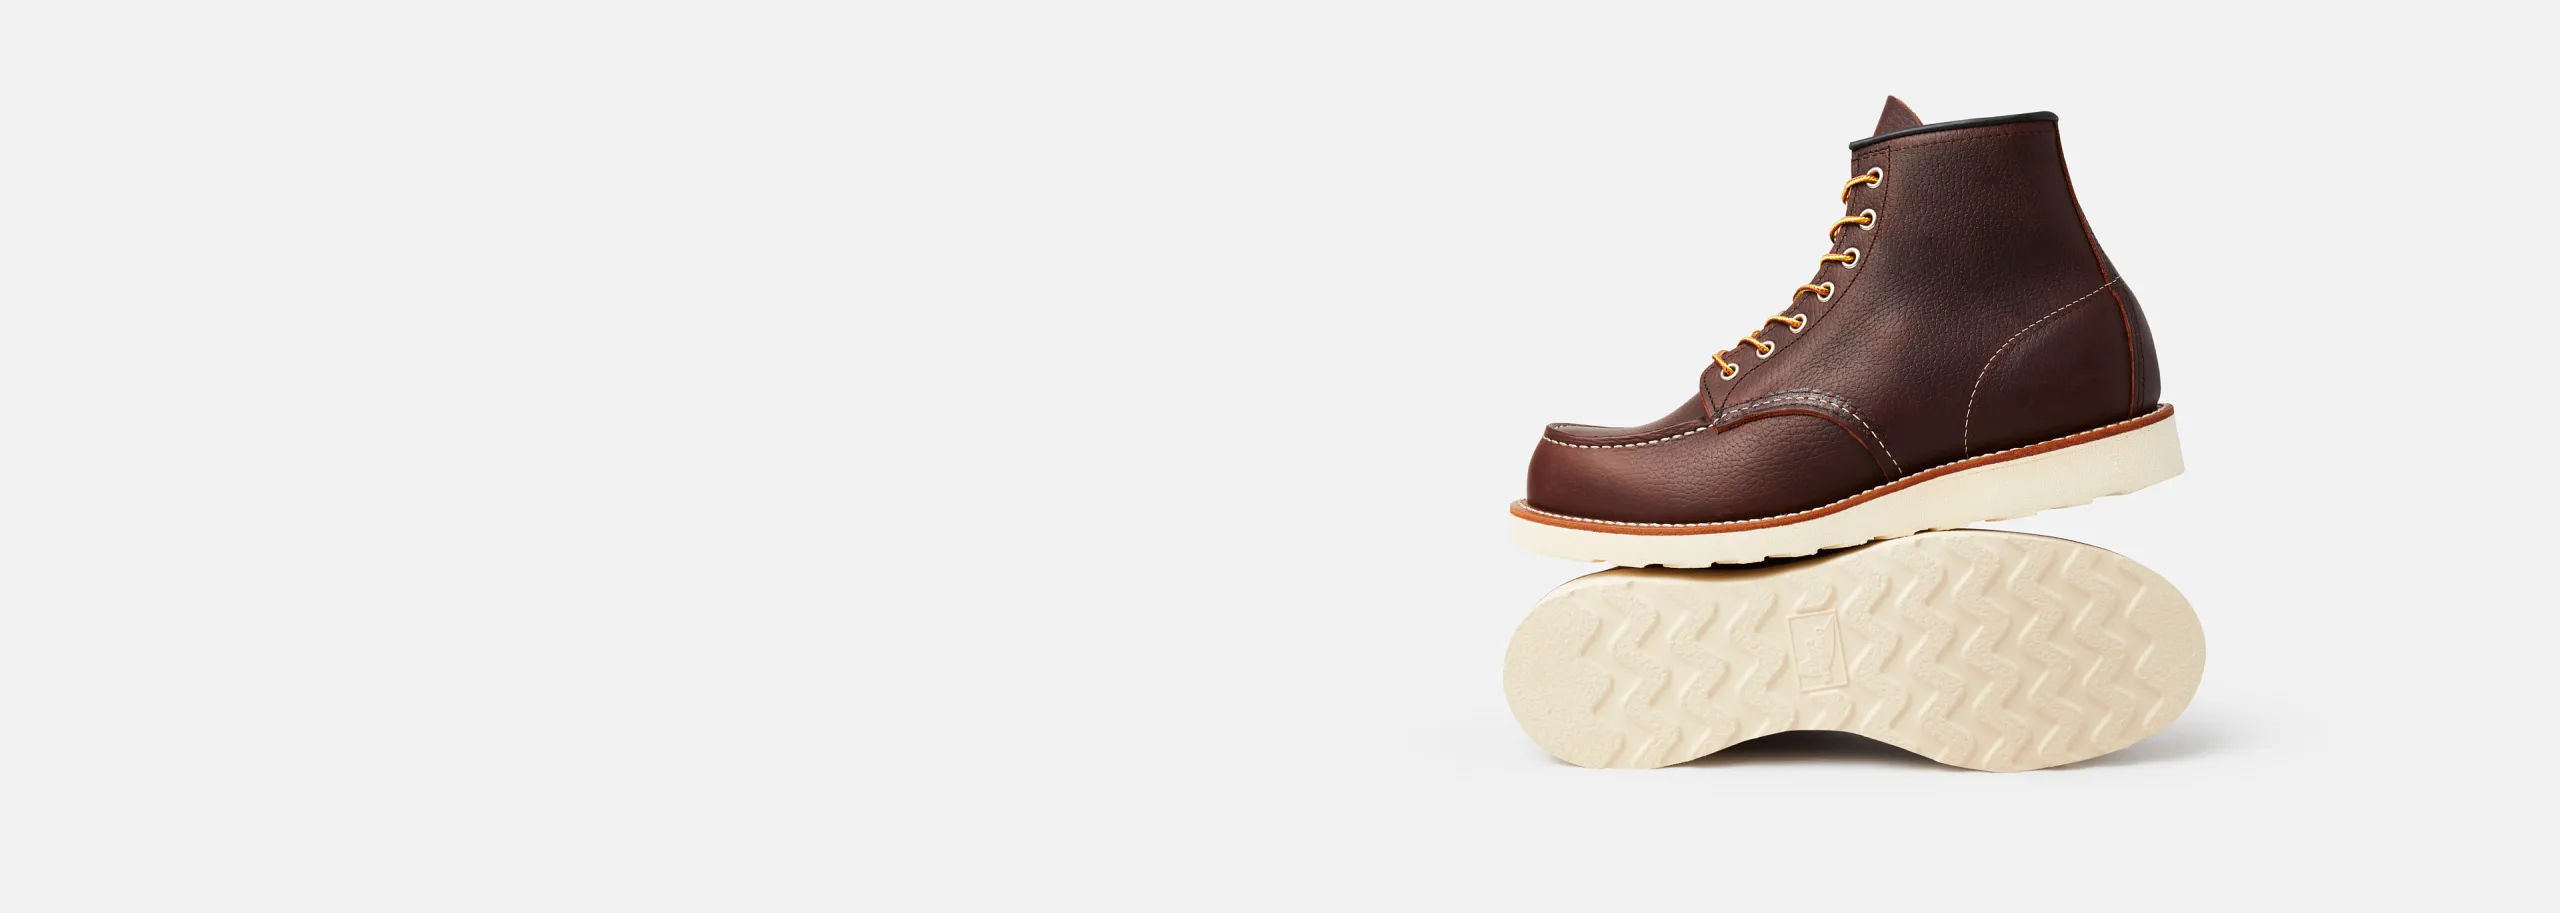 Red Wing Heritage Shoes